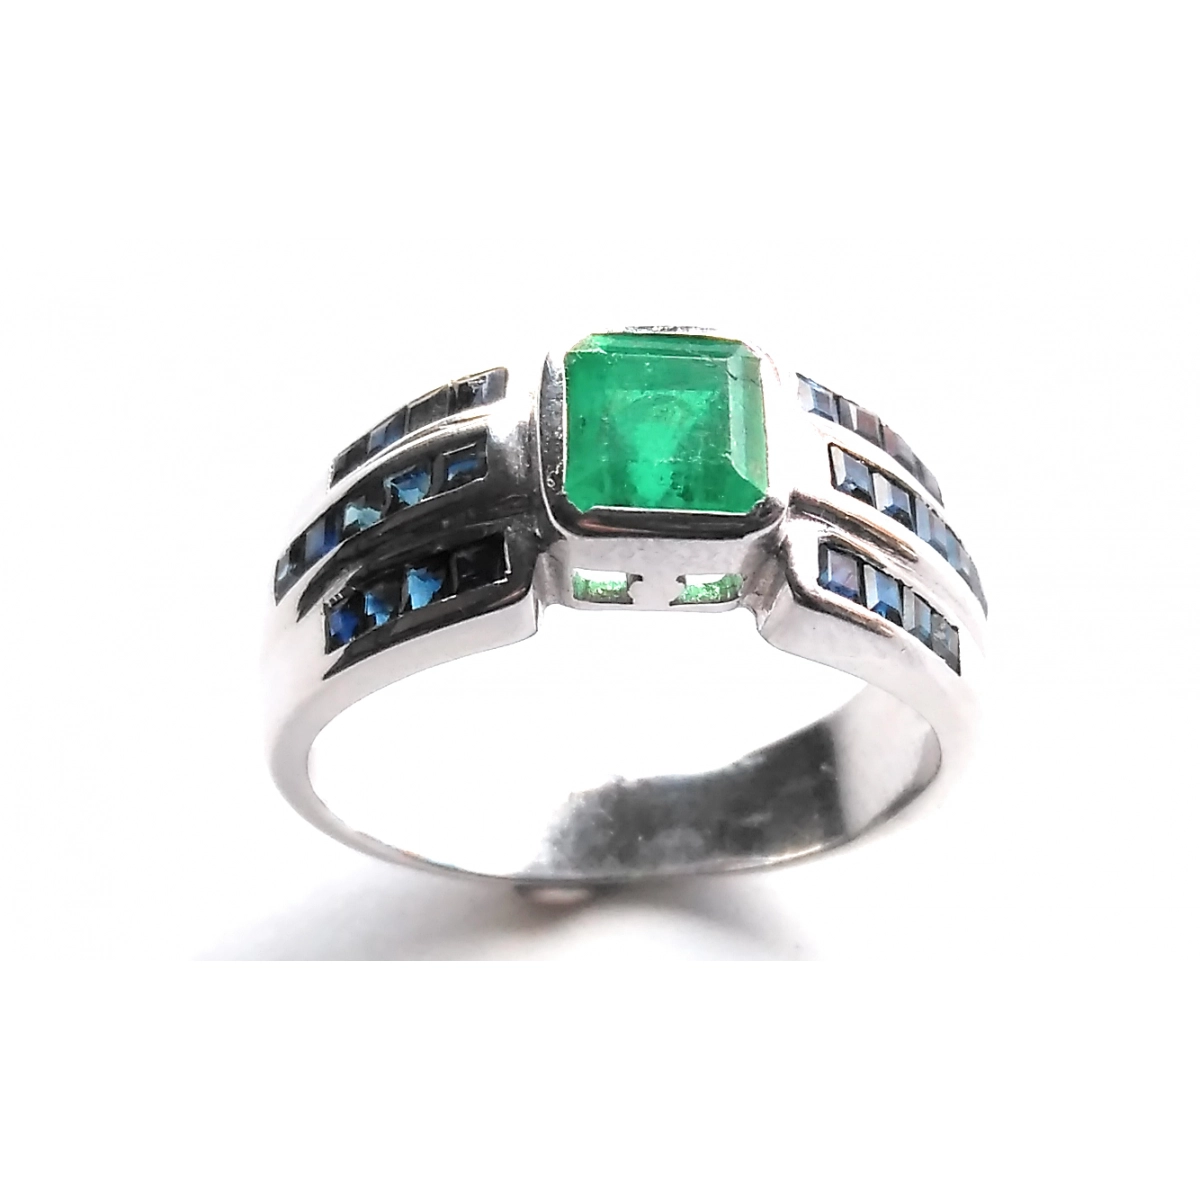 RING OF EMERALD AND SAPPHIRES 18K WHITE GOLD